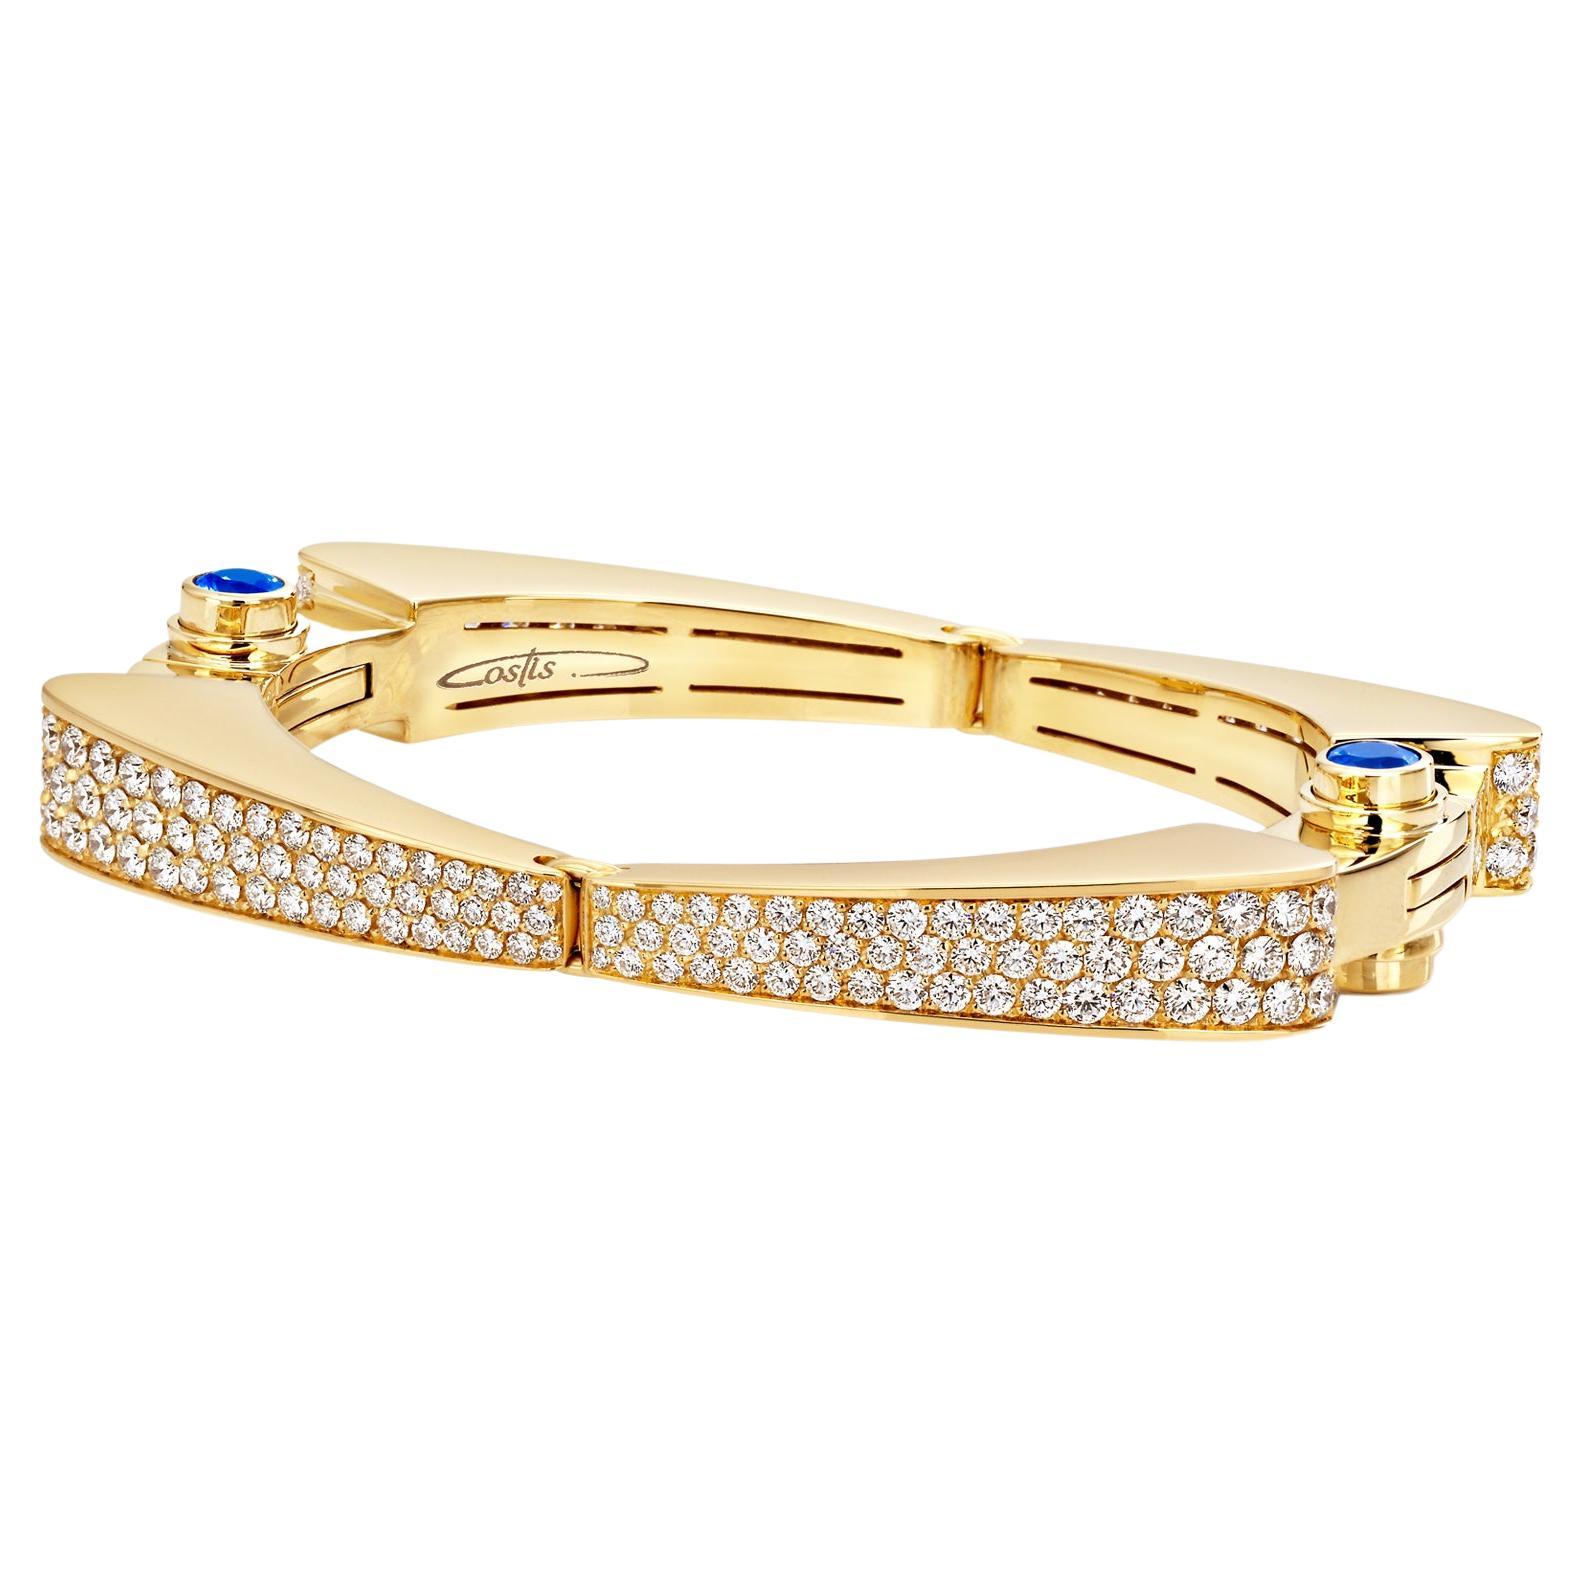 "Costis" Symmetry Cuff Pave' with Diamonds and Ceylon Royal Blue Sapphires